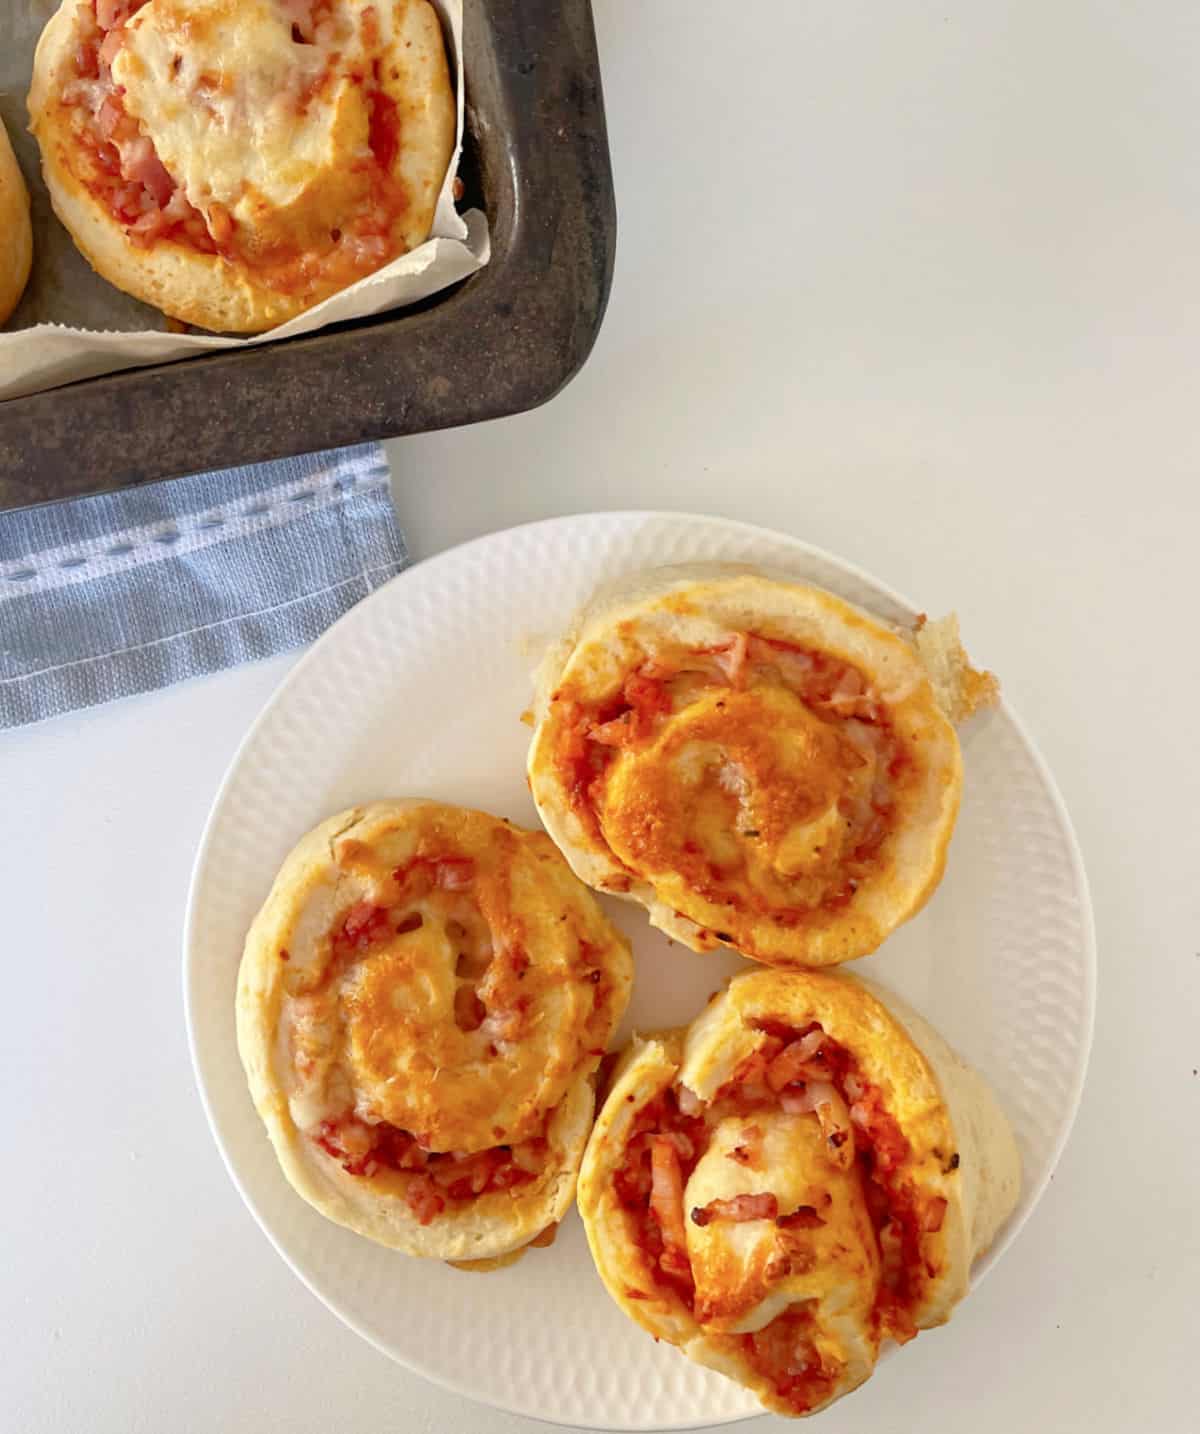 Overhead view of three pizza scrolls sitting on a white plate. In the background there is a baking tray sitting on a blue striped tea towel.